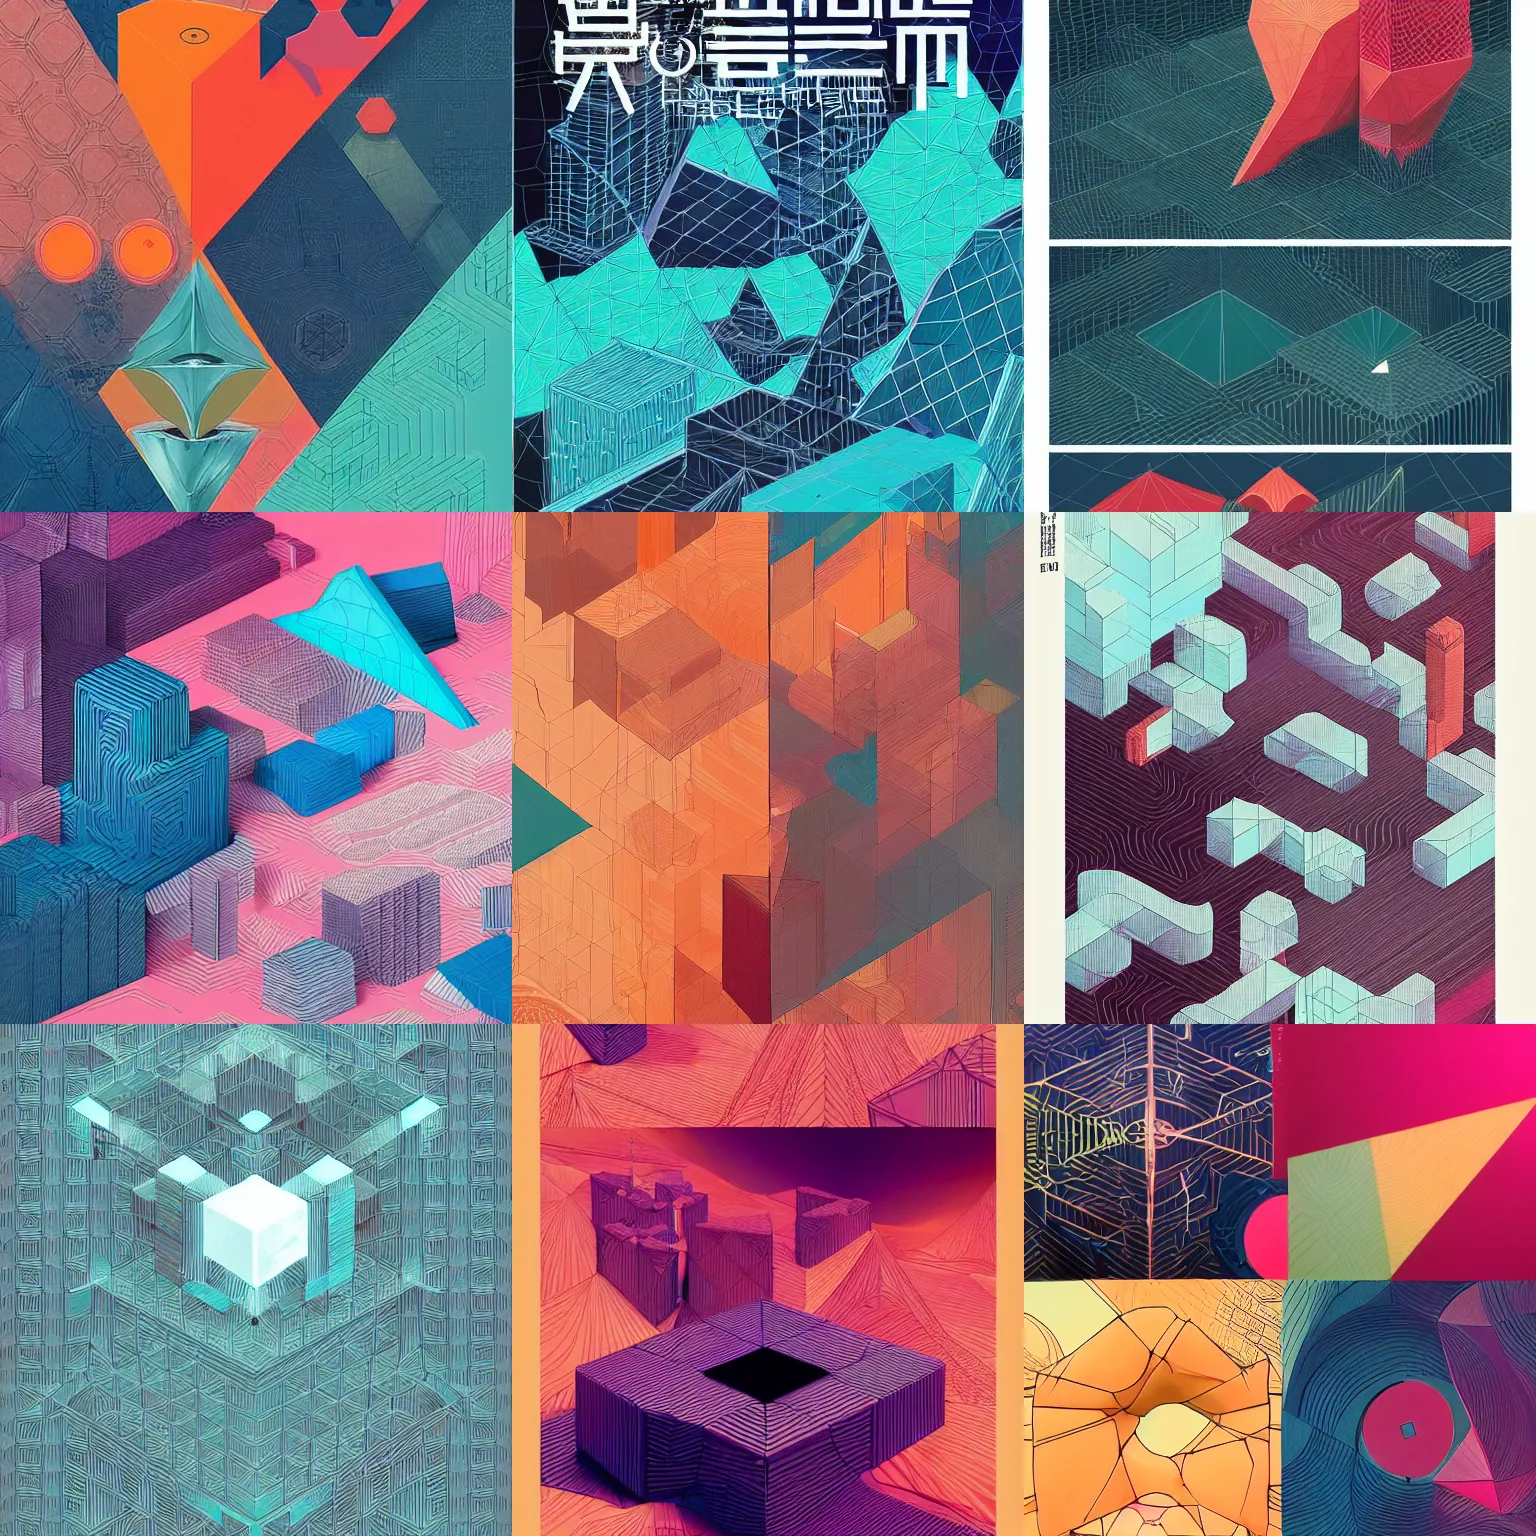 Prompt: abstract 3d geometric shapes by Feng Zhu and Loish and Laurie Greasley, Victo Ngai, Andreas Rocha, John Harris